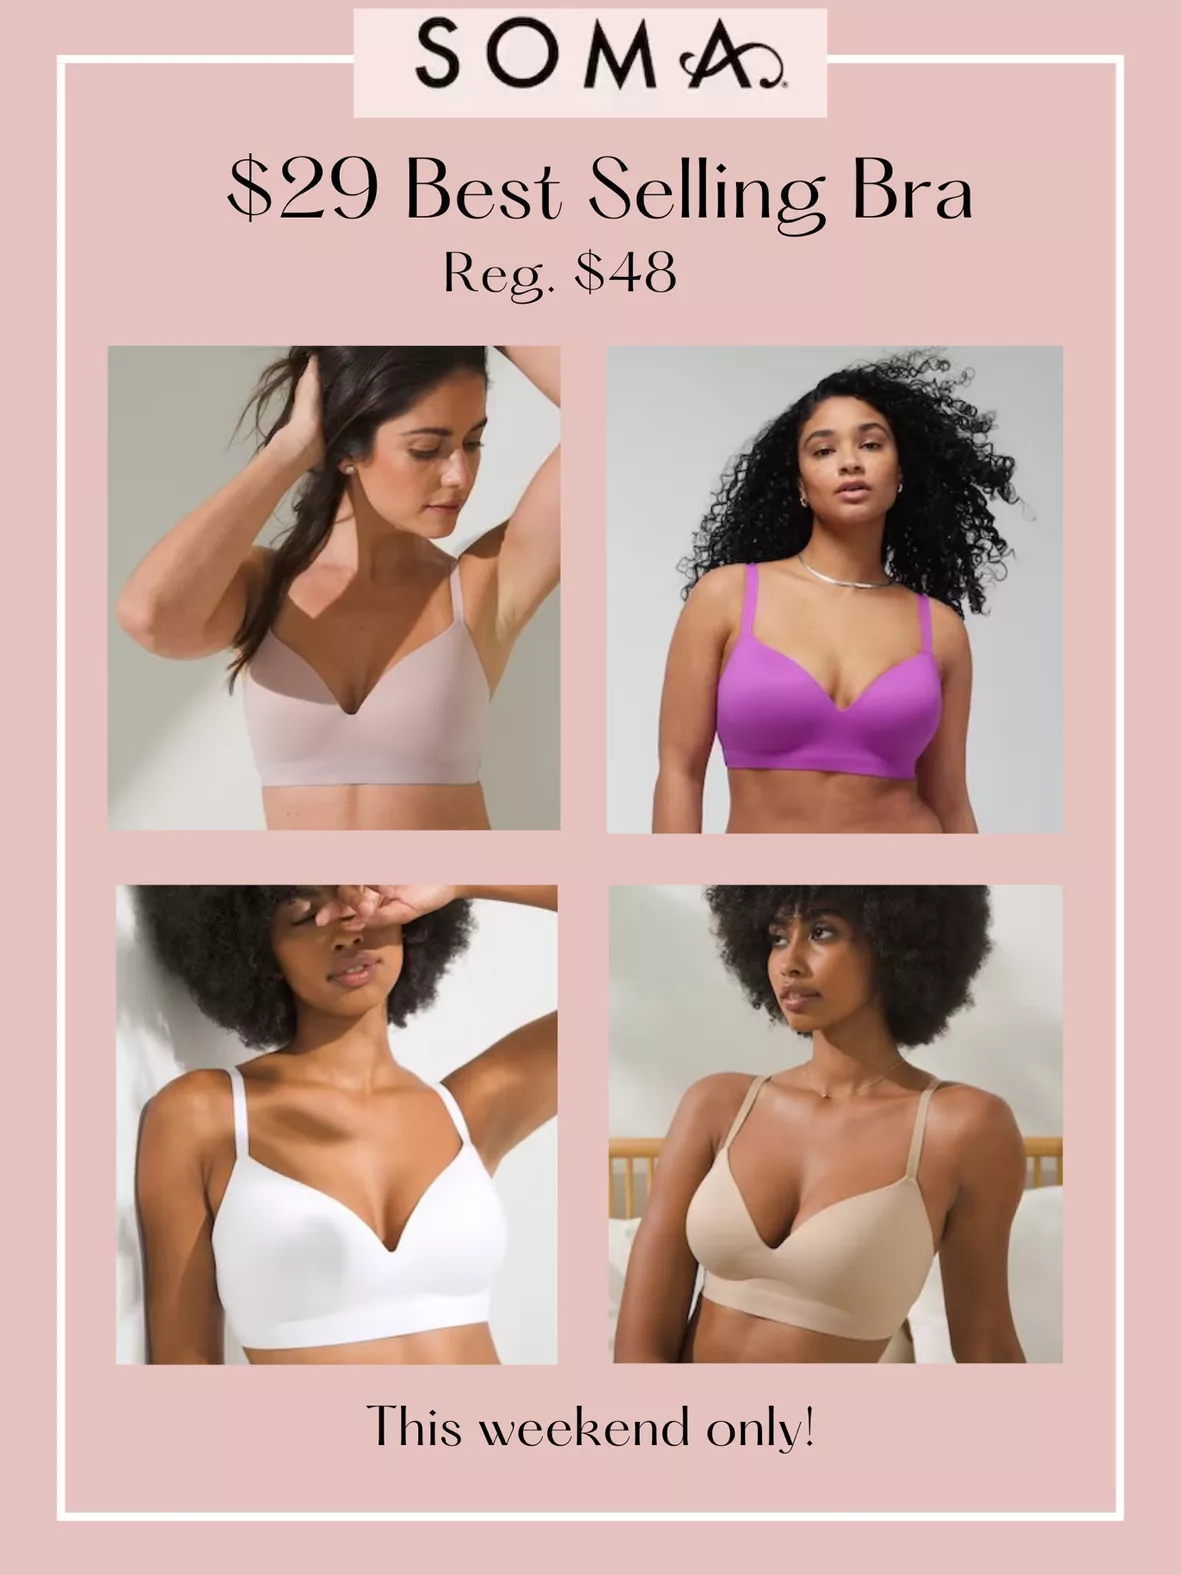 This 'Comfortable' Bra Is on Sale for $21 at